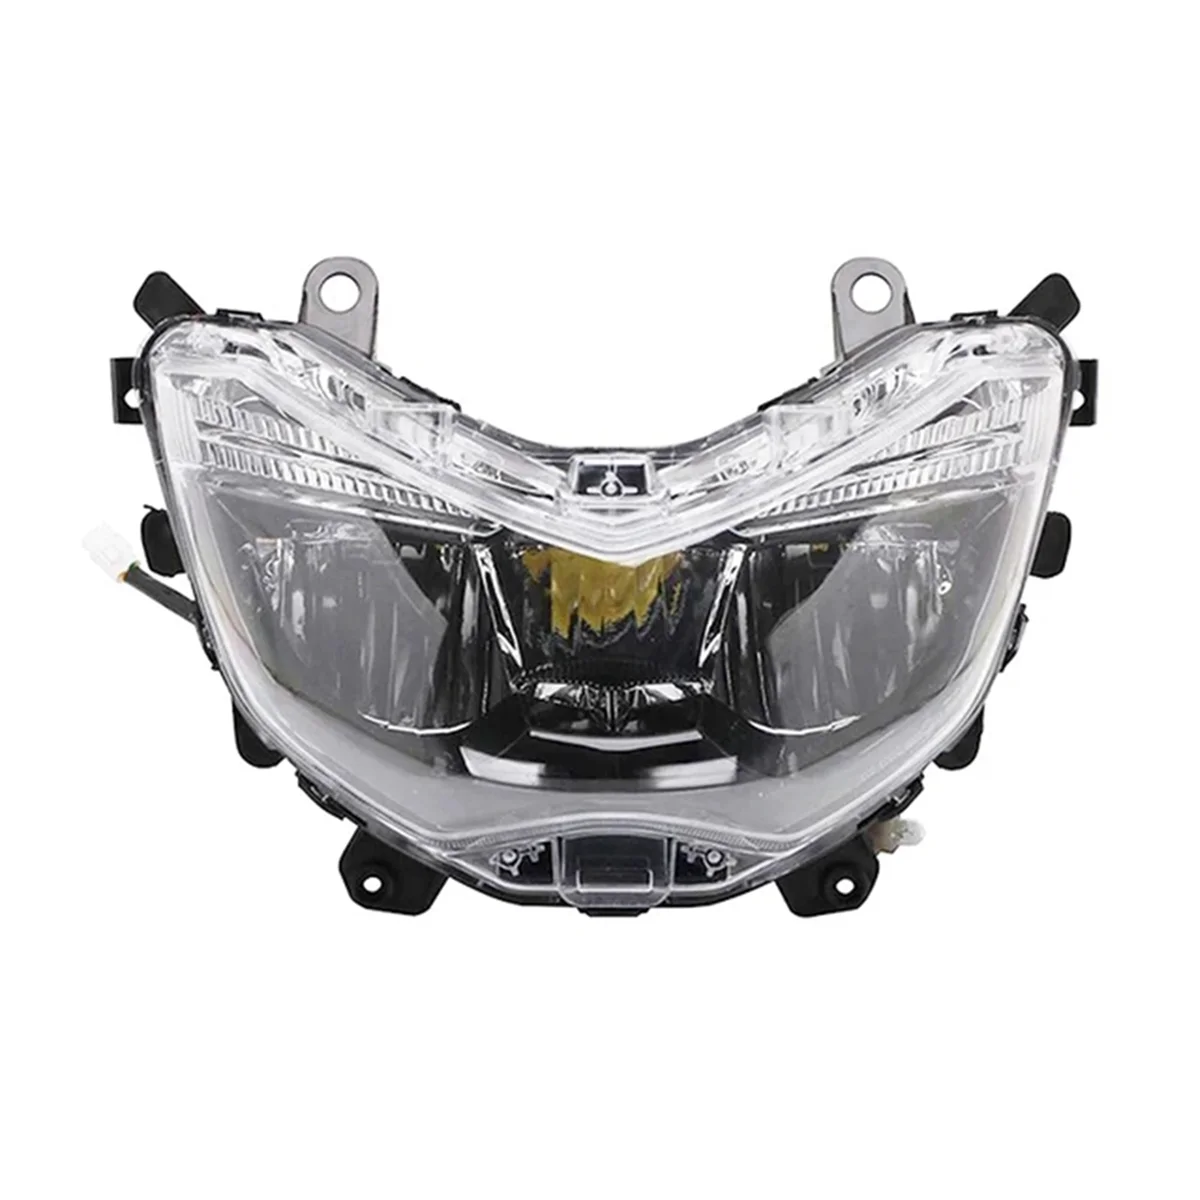 

Fit for Yamaha NMAX155 NMAX125 2016-2018 Motorcycle HeadLight Assembly Head Light Lamp Head